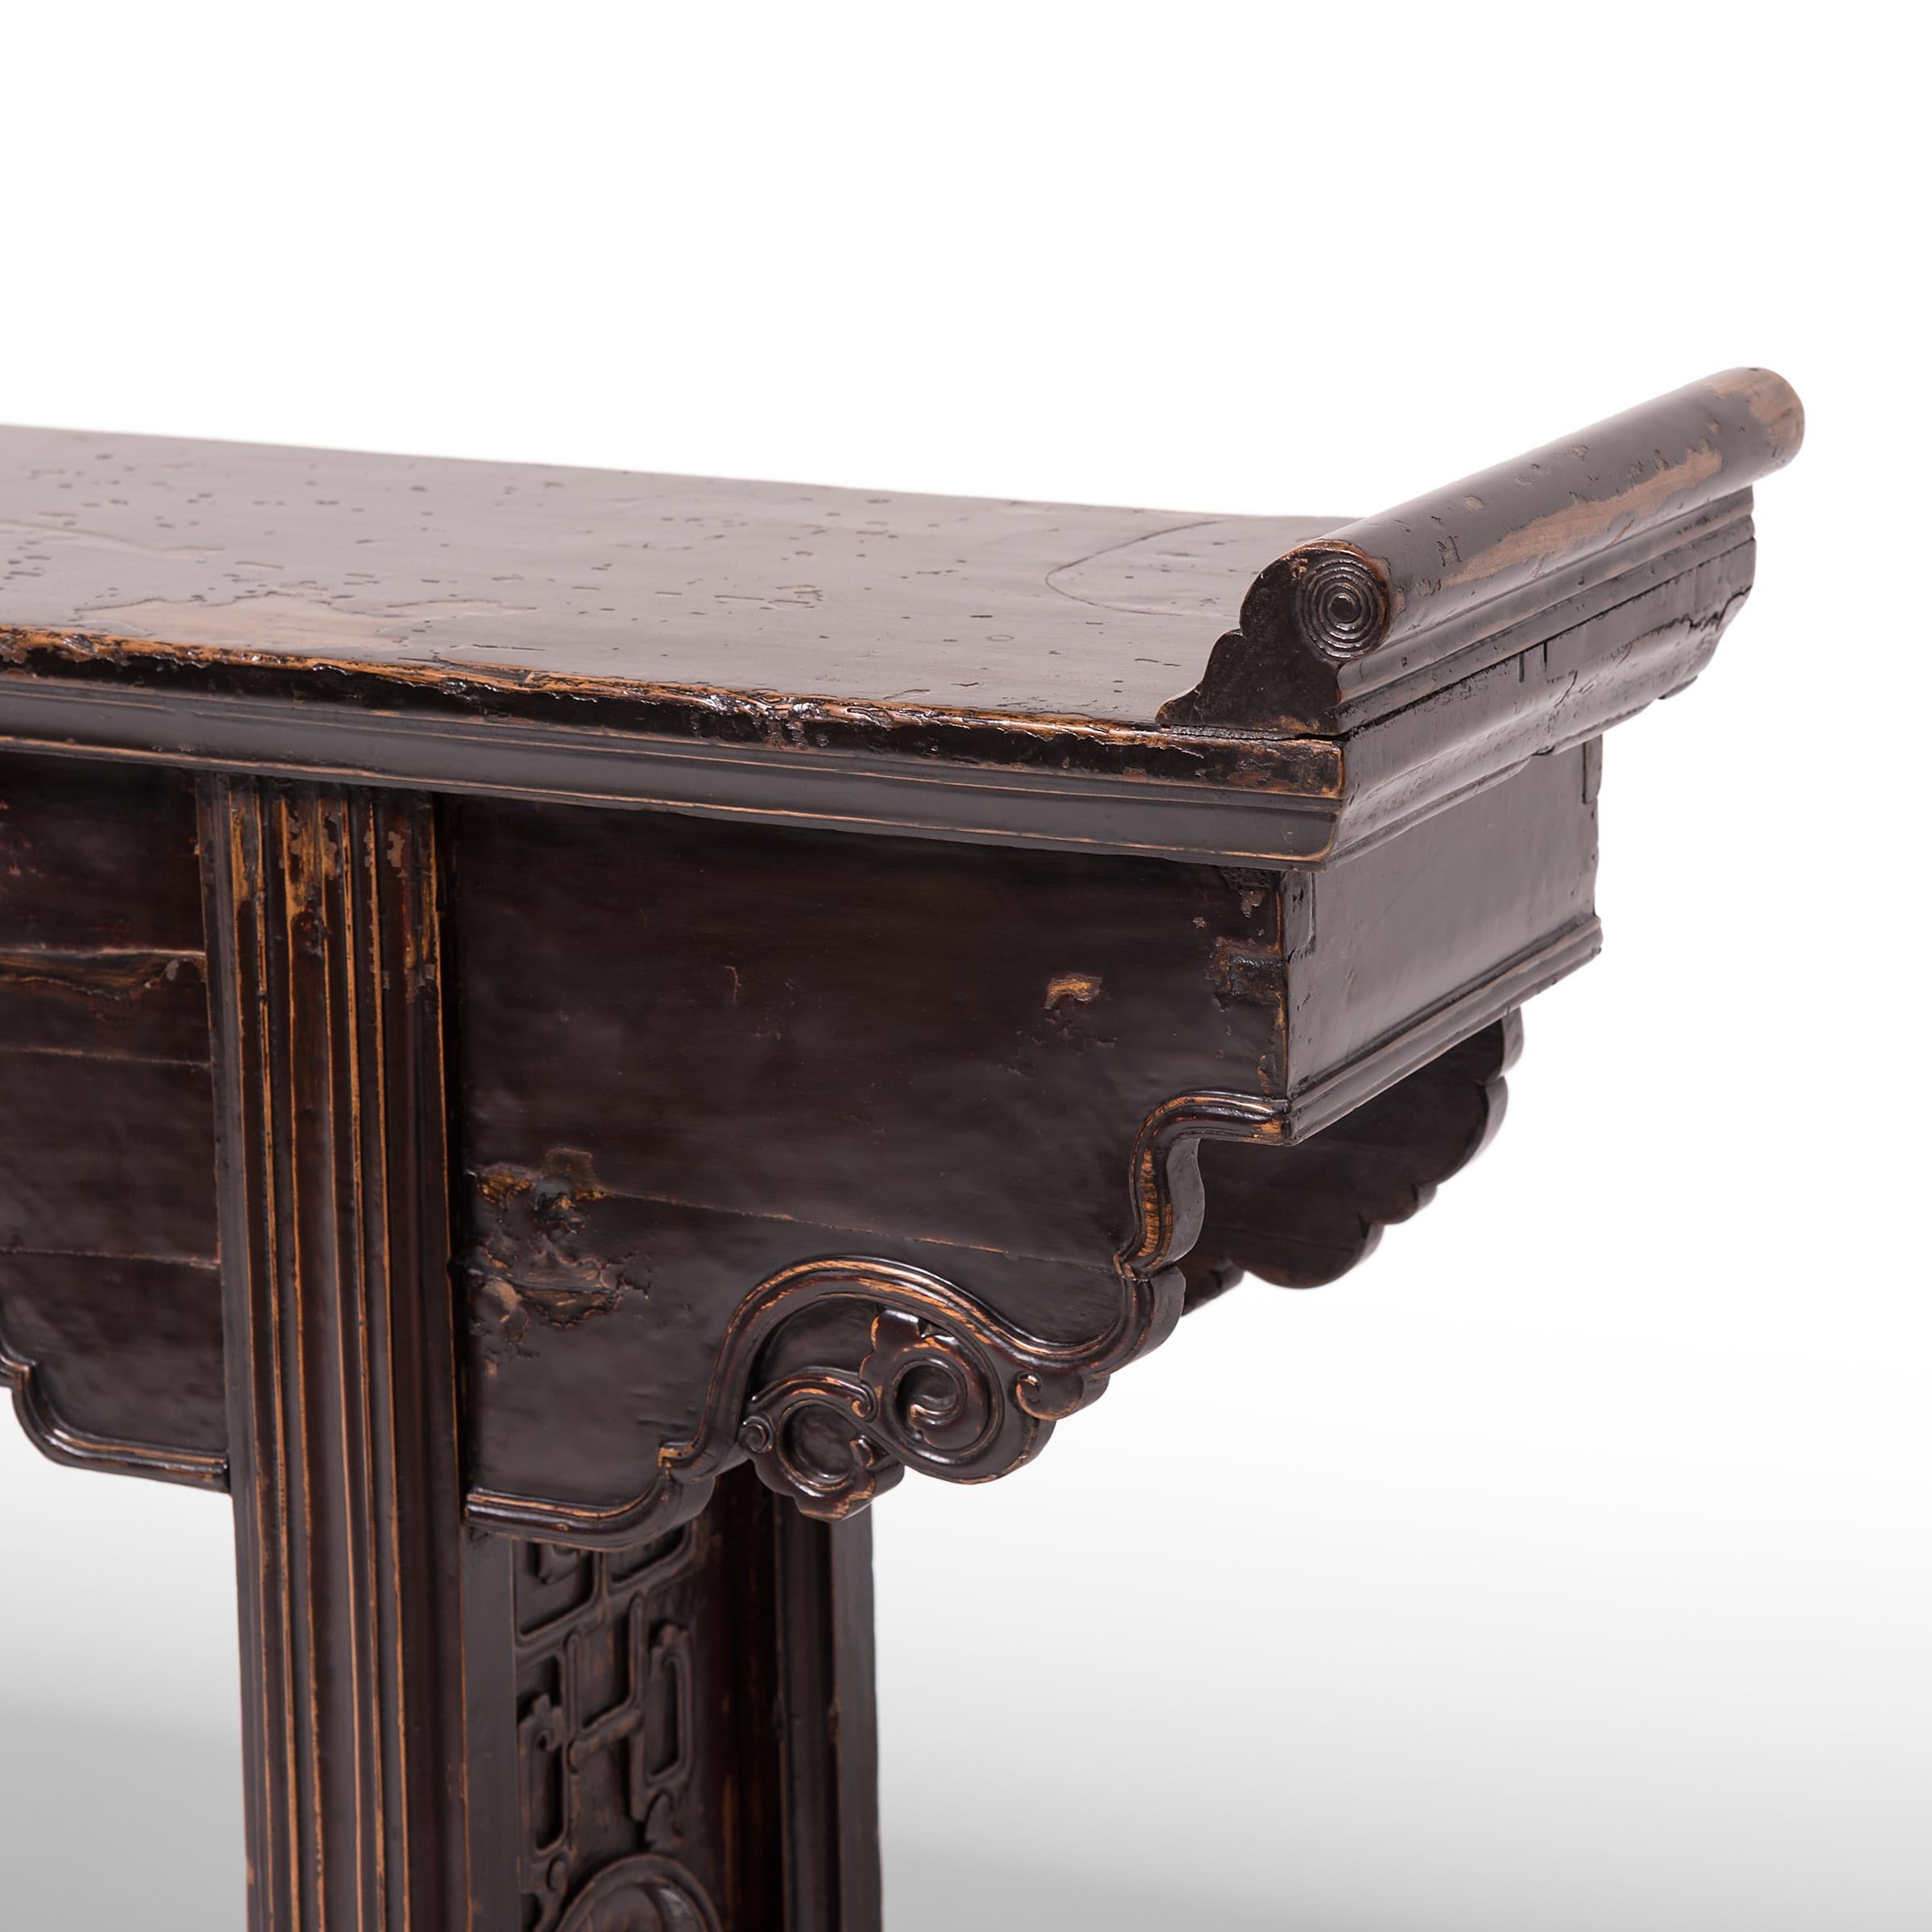 Qing Chinese Shallow Altar Table, c. 1850